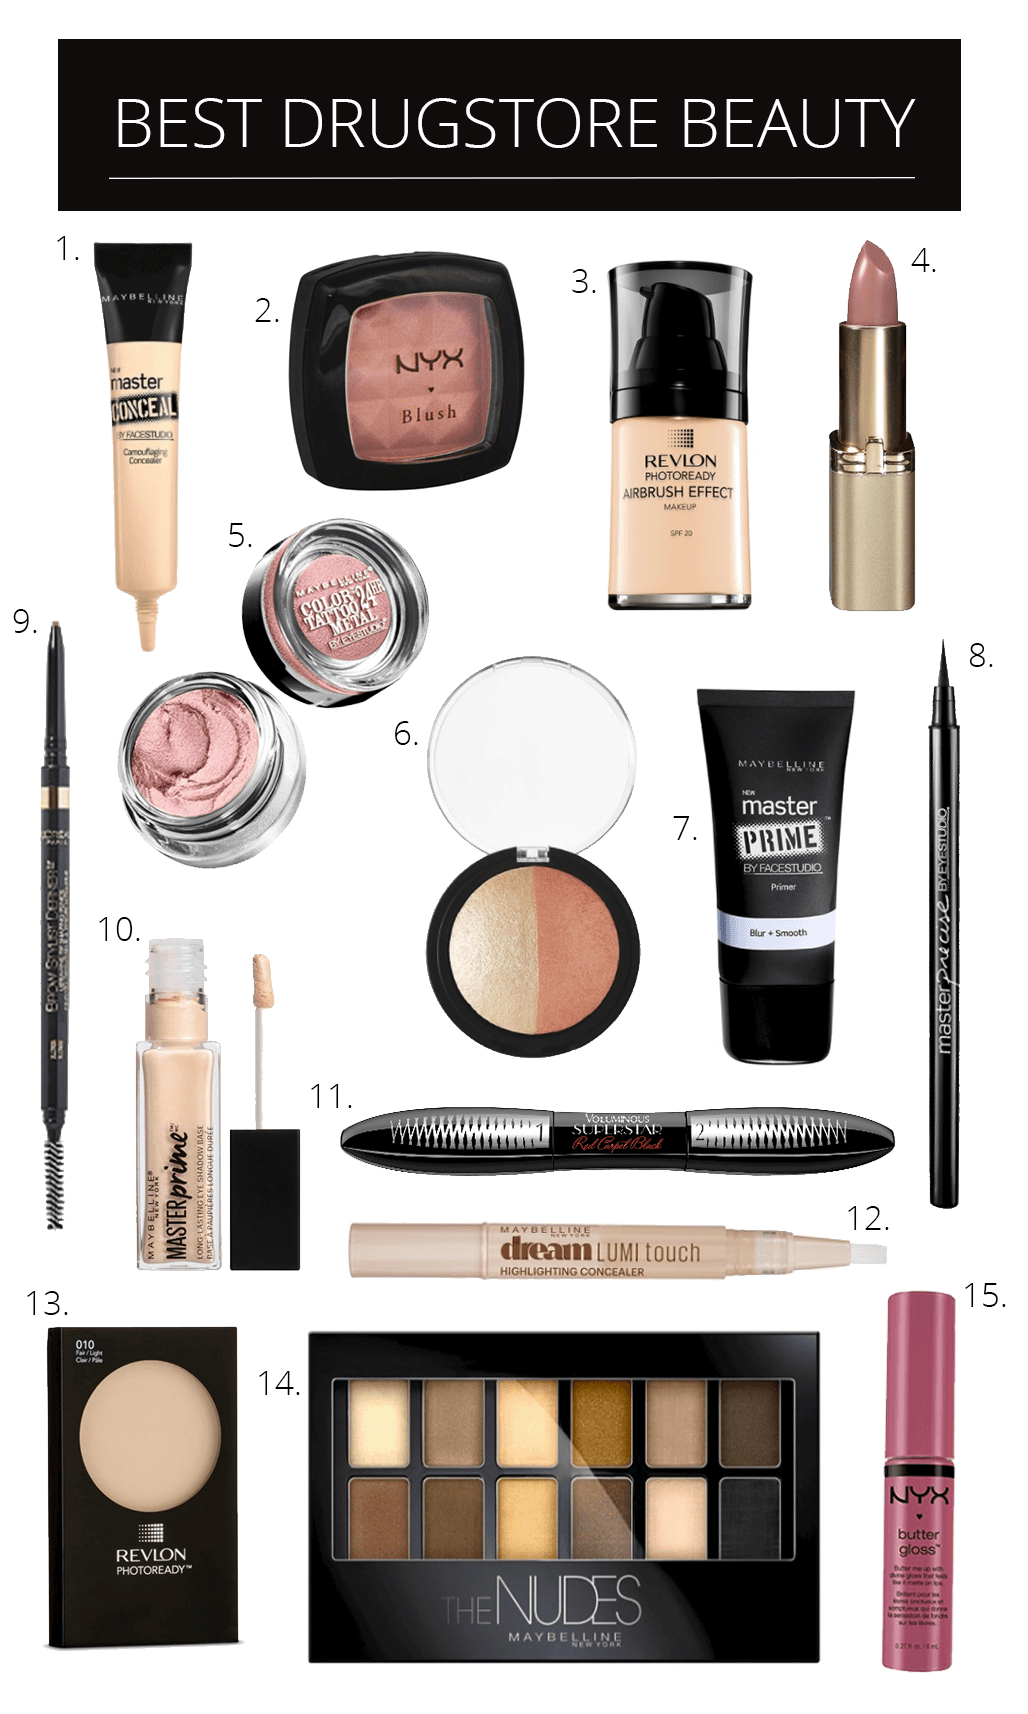 Best Drugstore Makeup Dupes, Top Drugstore Makeup Products, Drugstore Beauty Products